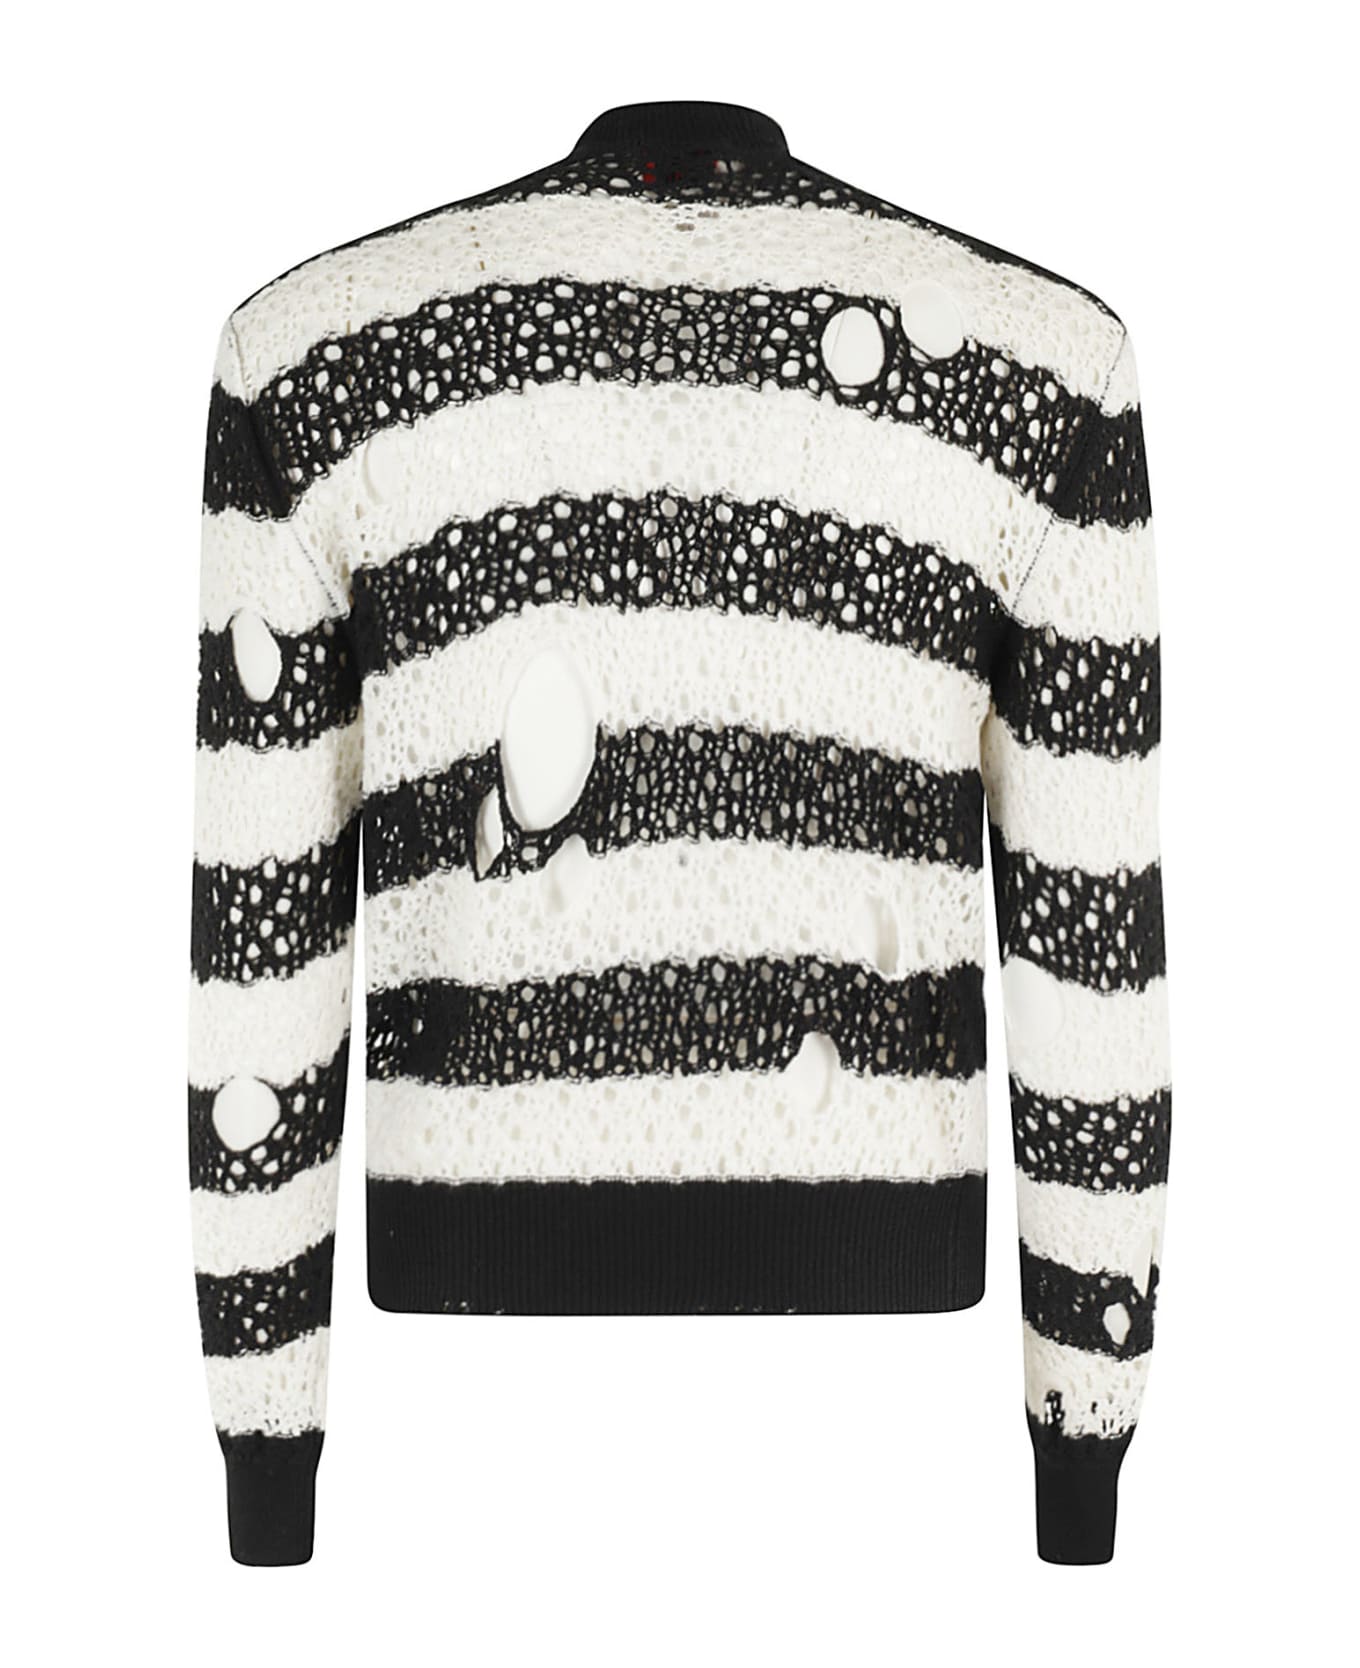 Liberal Youth Ministry Loose Knit Stripes - Black White 